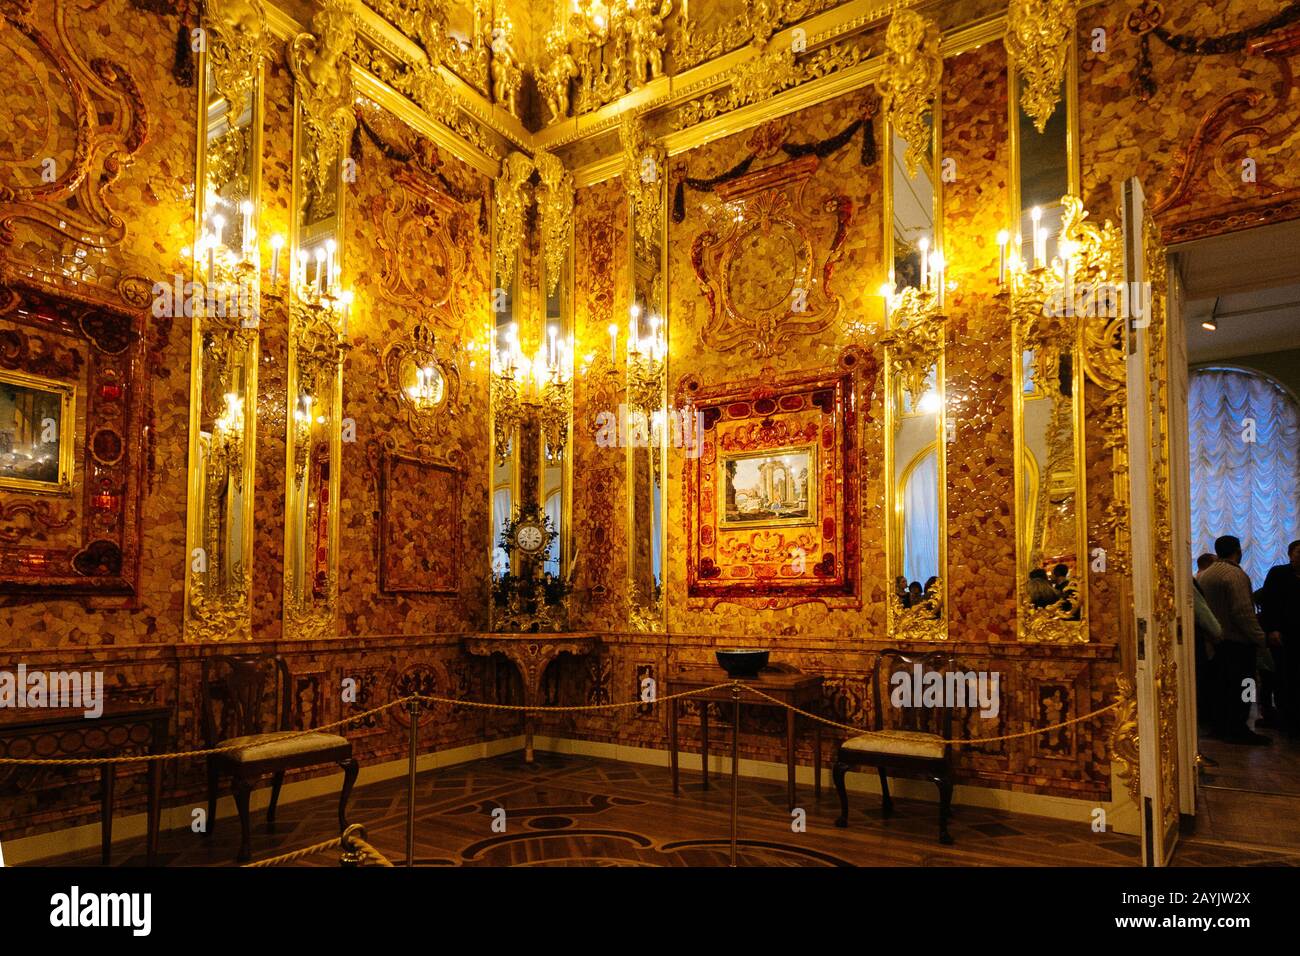 Catherine Palace, Interior of Amber room. St. Petersburg, Russia - Jan. 4 2014 Stock Photo